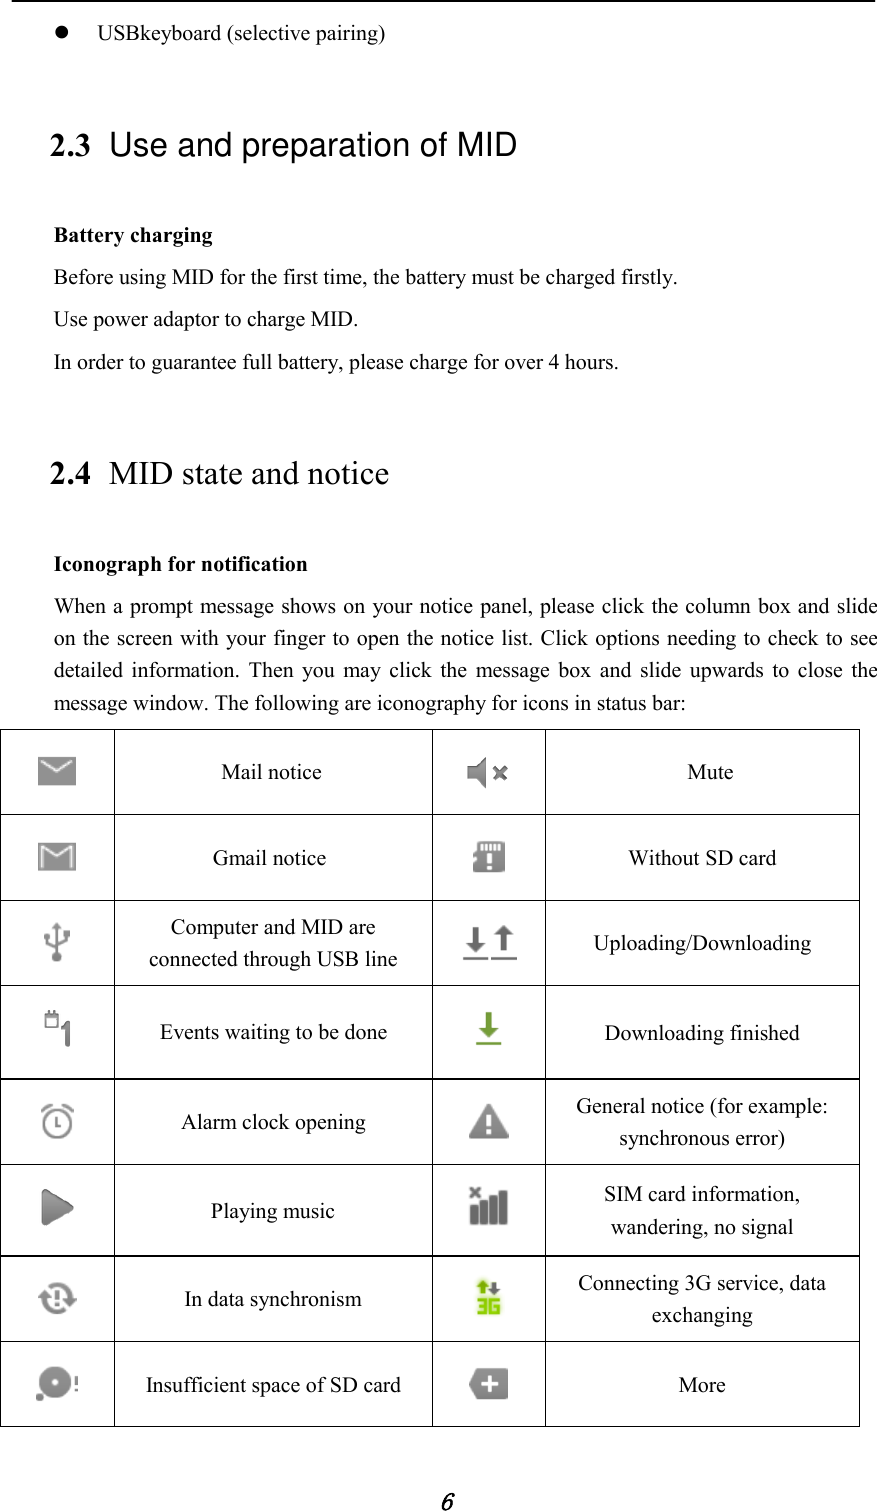            6  USBkeyboard (selective pairing) 2.3 Use and preparation of MID Battery charging Before using MID for the first time, the battery must be charged firstly. Use power adaptor to charge MID. In order to guarantee full battery, please charge for over 4 hours. 2.4 MID state and notice Iconograph for notification When a prompt message shows on your notice panel, please click the column box and slide on the screen with your finger to open the notice list. Click options needing to check to see detailed information. Then you may click the message box and slide upwards to close the message window. The following are iconography for icons in status bar:  Mail notice  Mute  Gmail notice  Without SD card  Computer and MID are connected through USB line   Uploading/Downloading  Events waiting to be done   Downloading finished  Alarm clock opening  General notice (for example: synchronous error)  Playing music  SIM card information, wandering, no signal  In data synchronism  Connecting 3G service, data exchanging  Insufficient space of SD card  More 